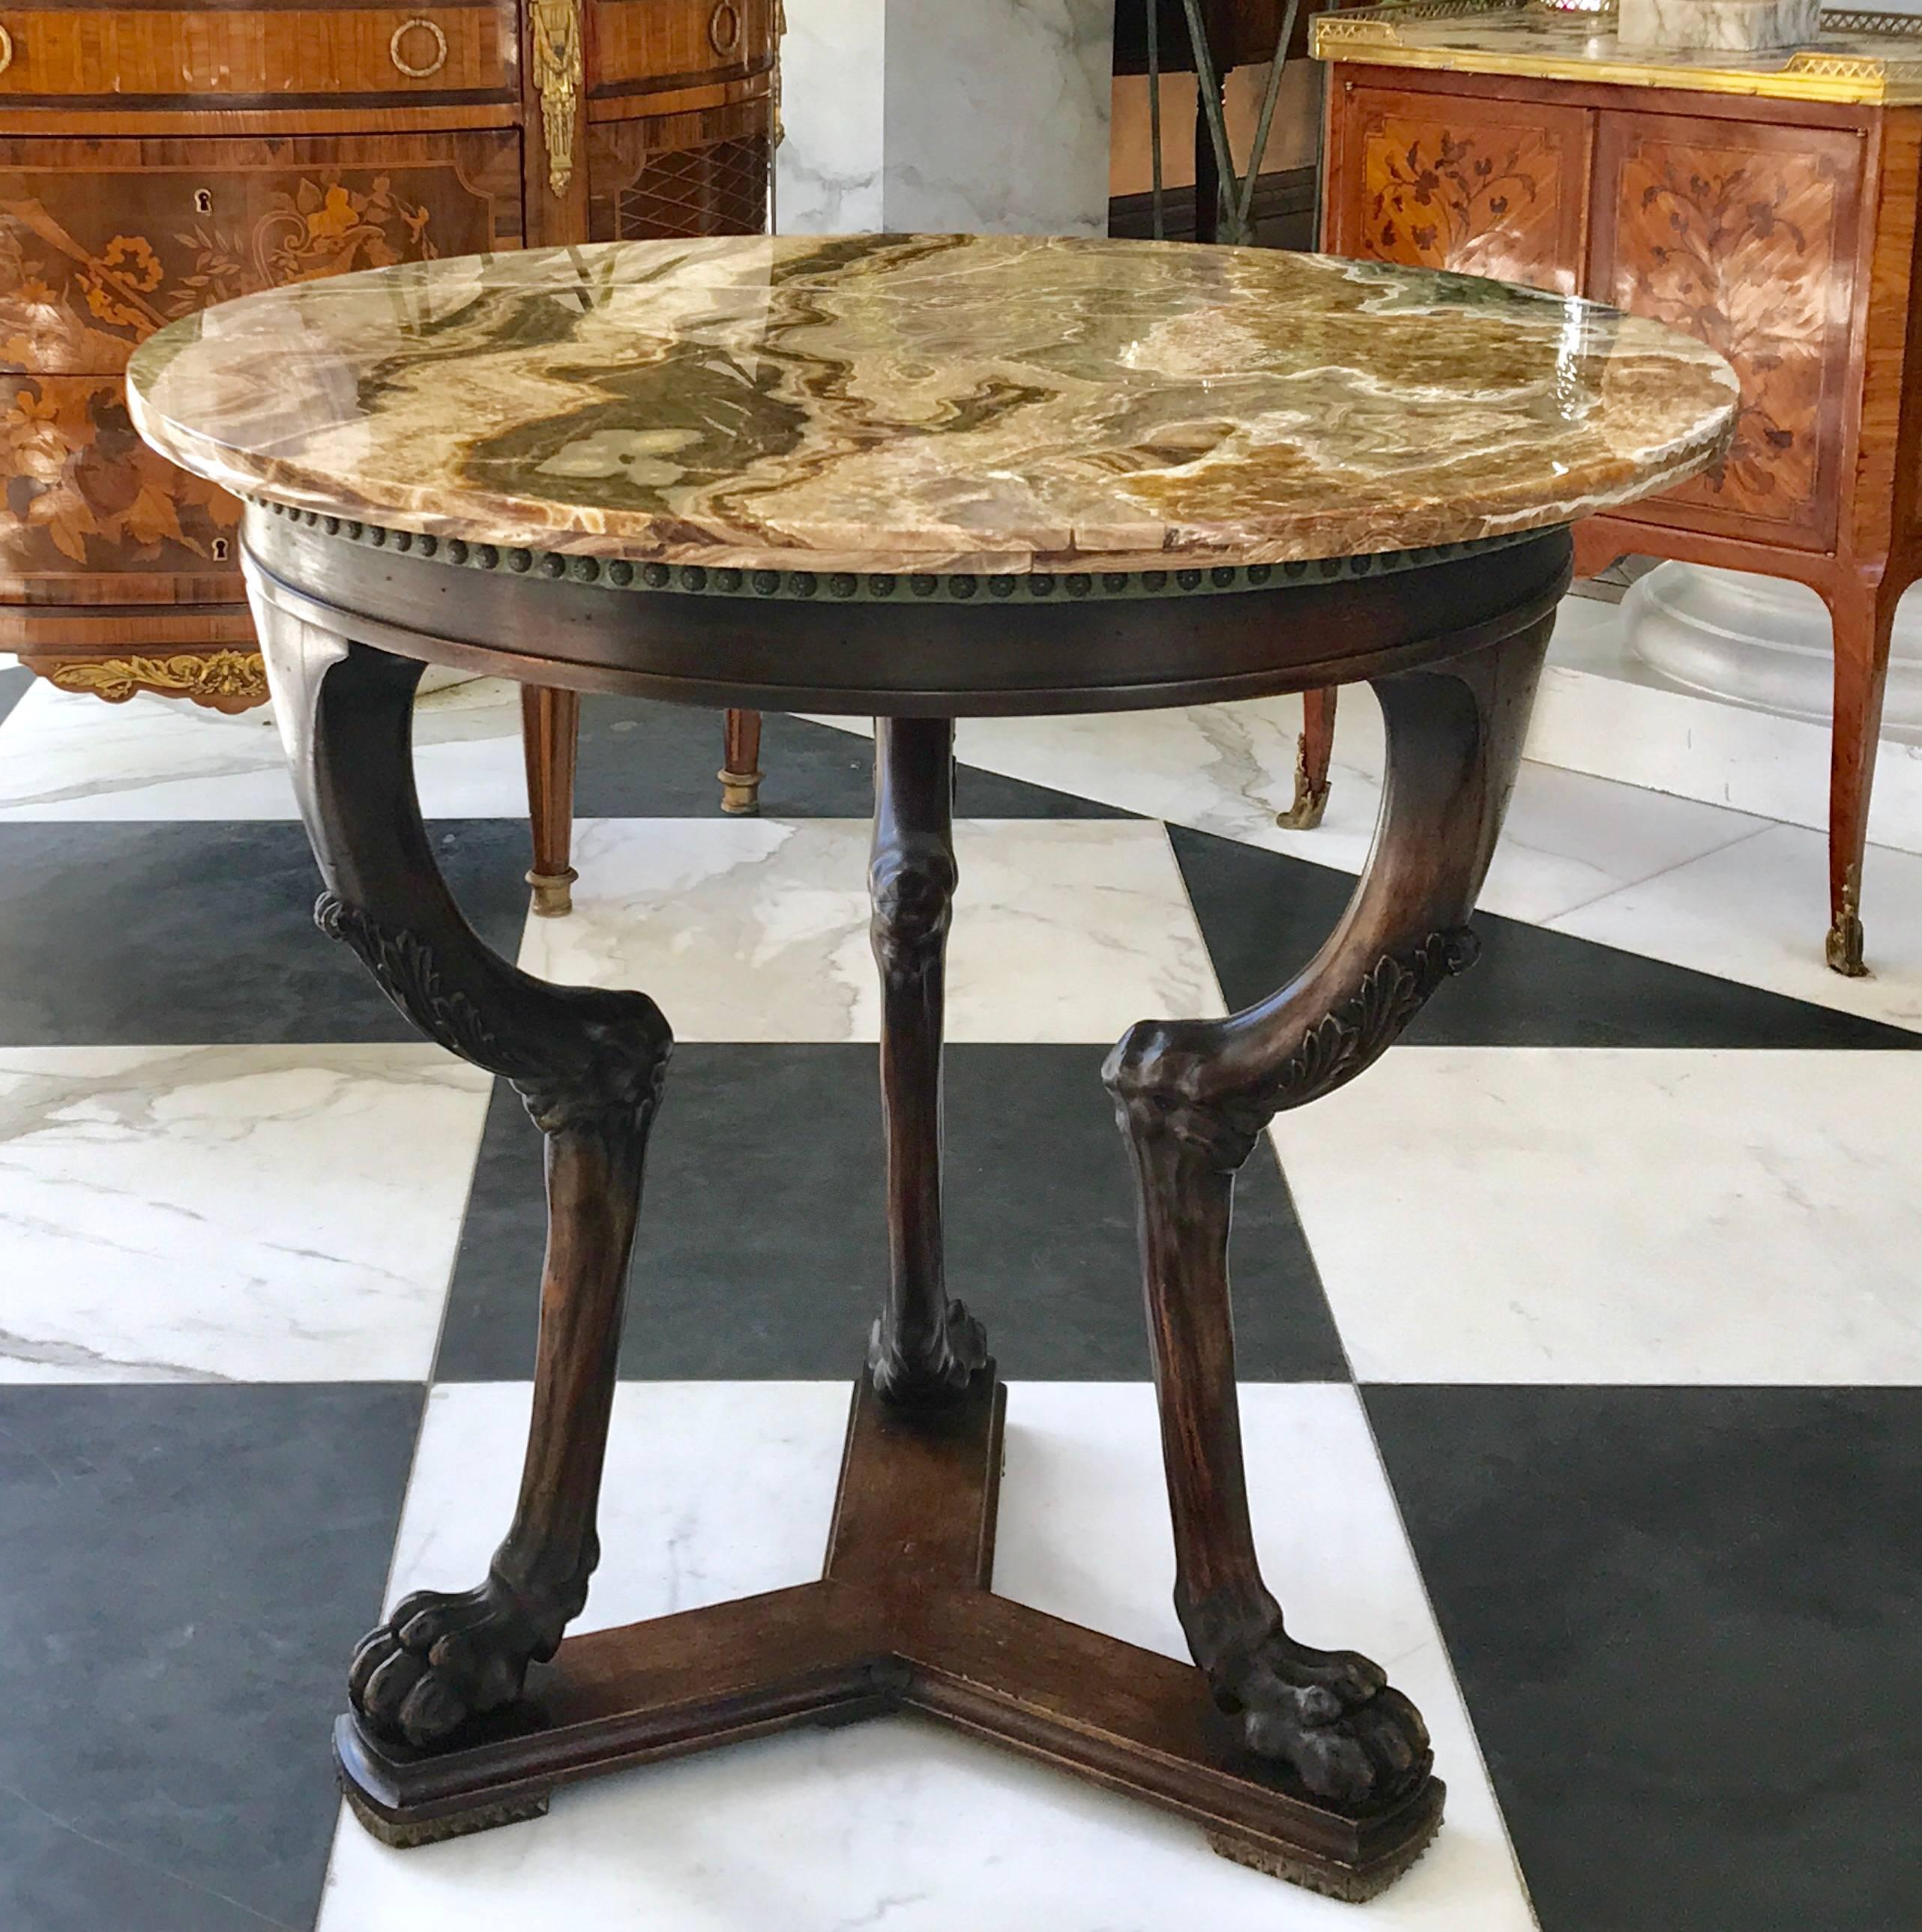 This extraordinary neoclassical side table is hand carved in the mid 19th century in Italy. Made of walnut with a rare deep amber onyx top that will catch the eye of anyone.
The elegance of this table is outstanding! 
Made in Italy ca 1840